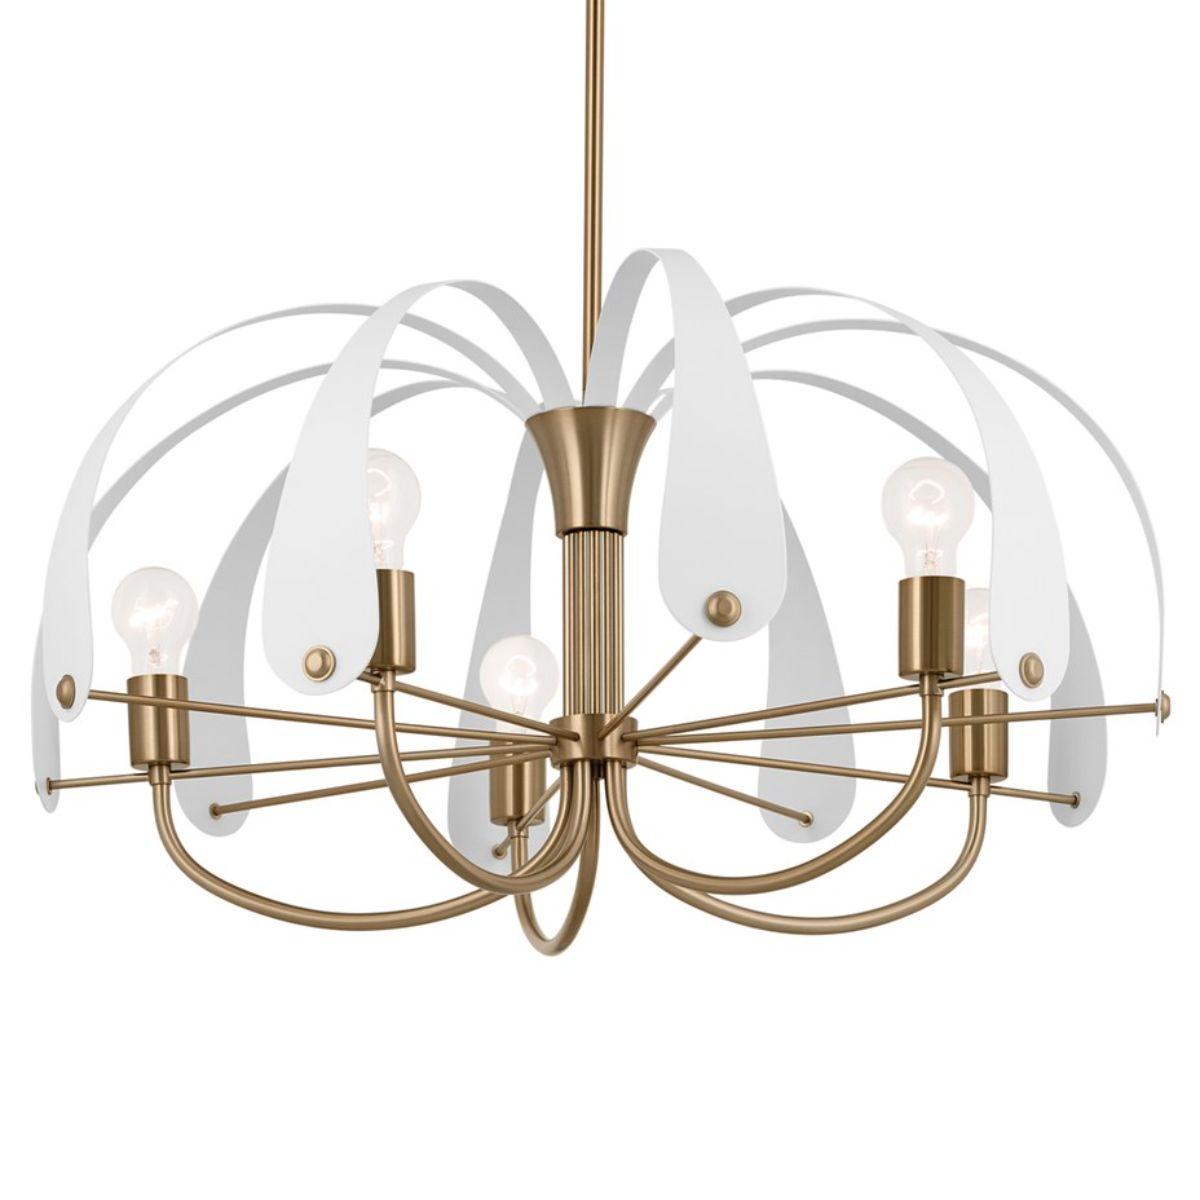 Petal 31 in. 5 Lights Chandelier Champagne Bronze and Black Finish